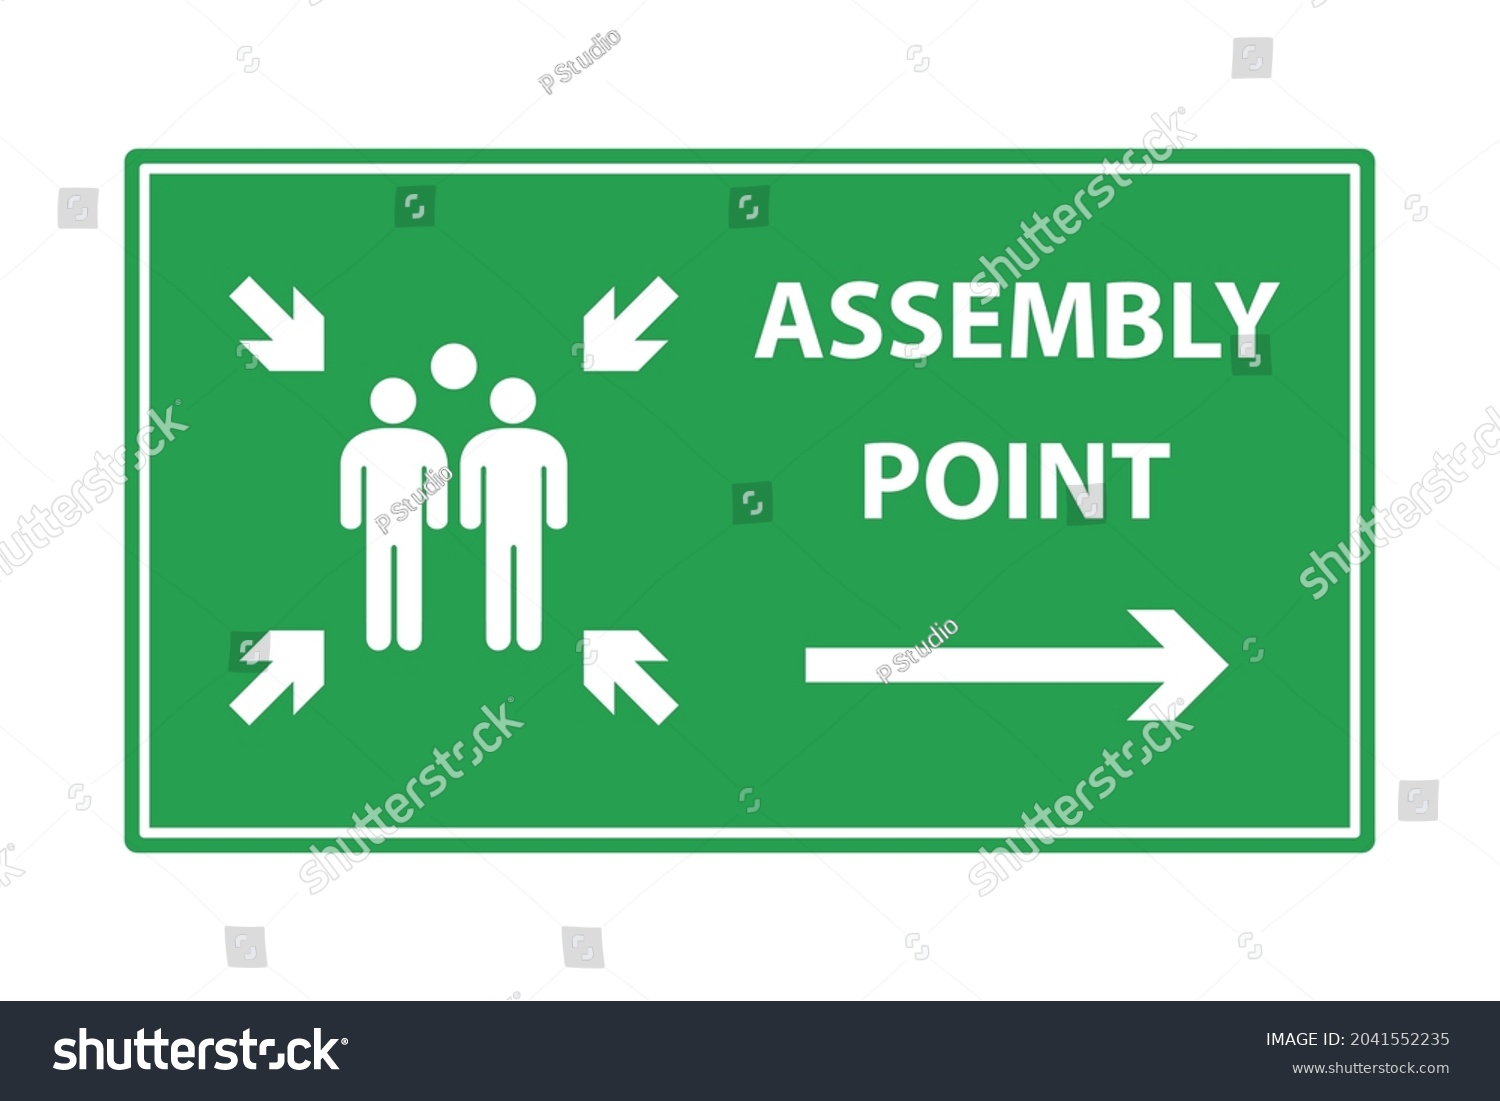 fire-assembly-point-sign-gathering-point-stock-vector-royalty-free